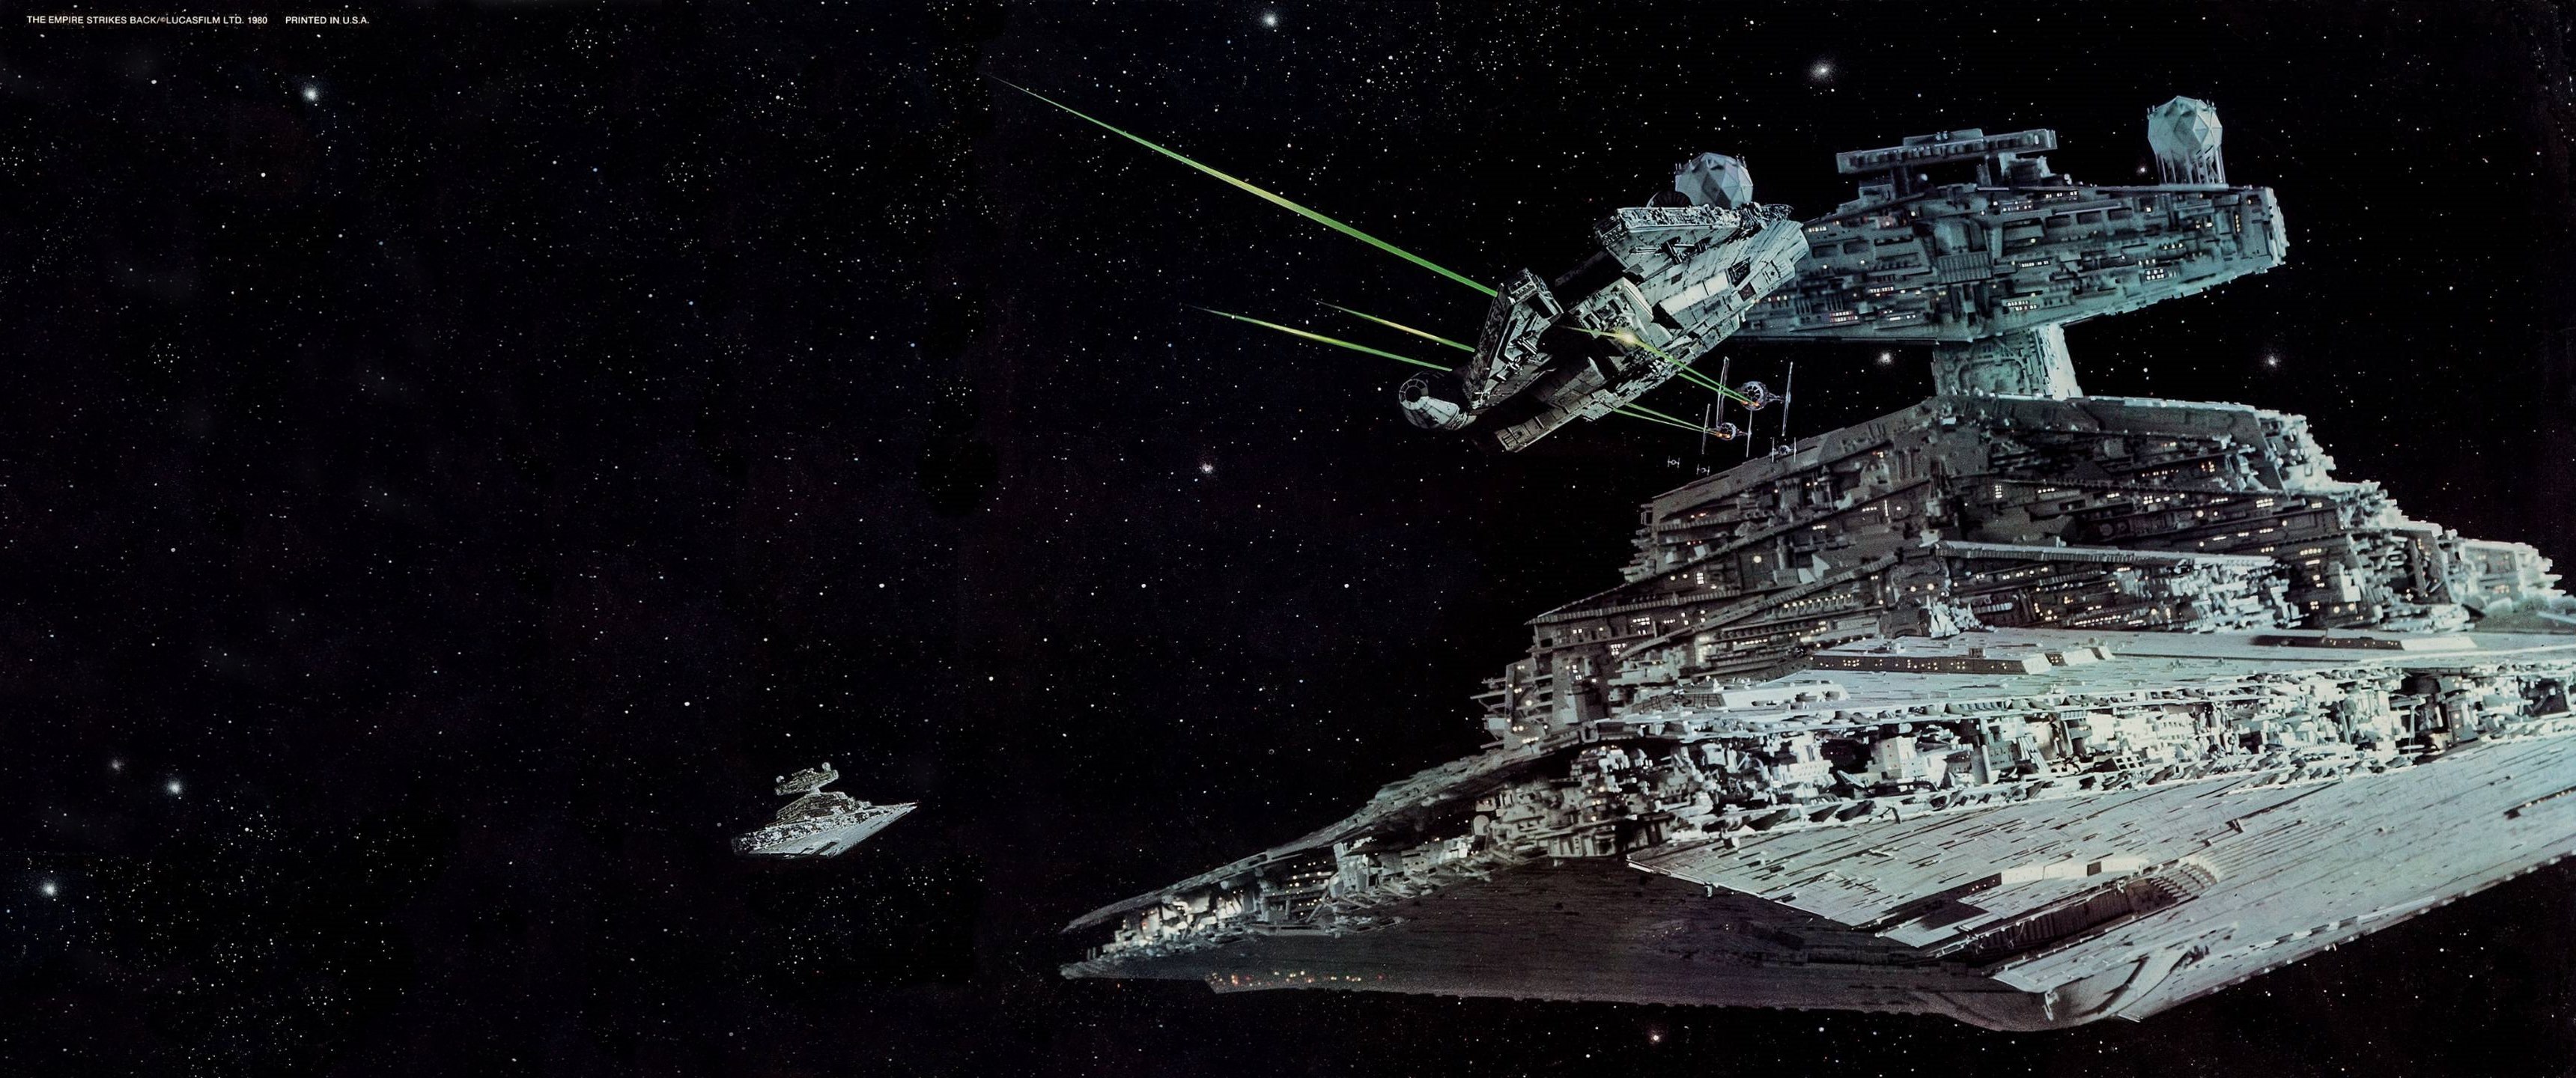 Star Wars Millennium Falcon Star Destroyer Star Wars Ships Imperial Forces Movies The Empire Strikes 3440x1440